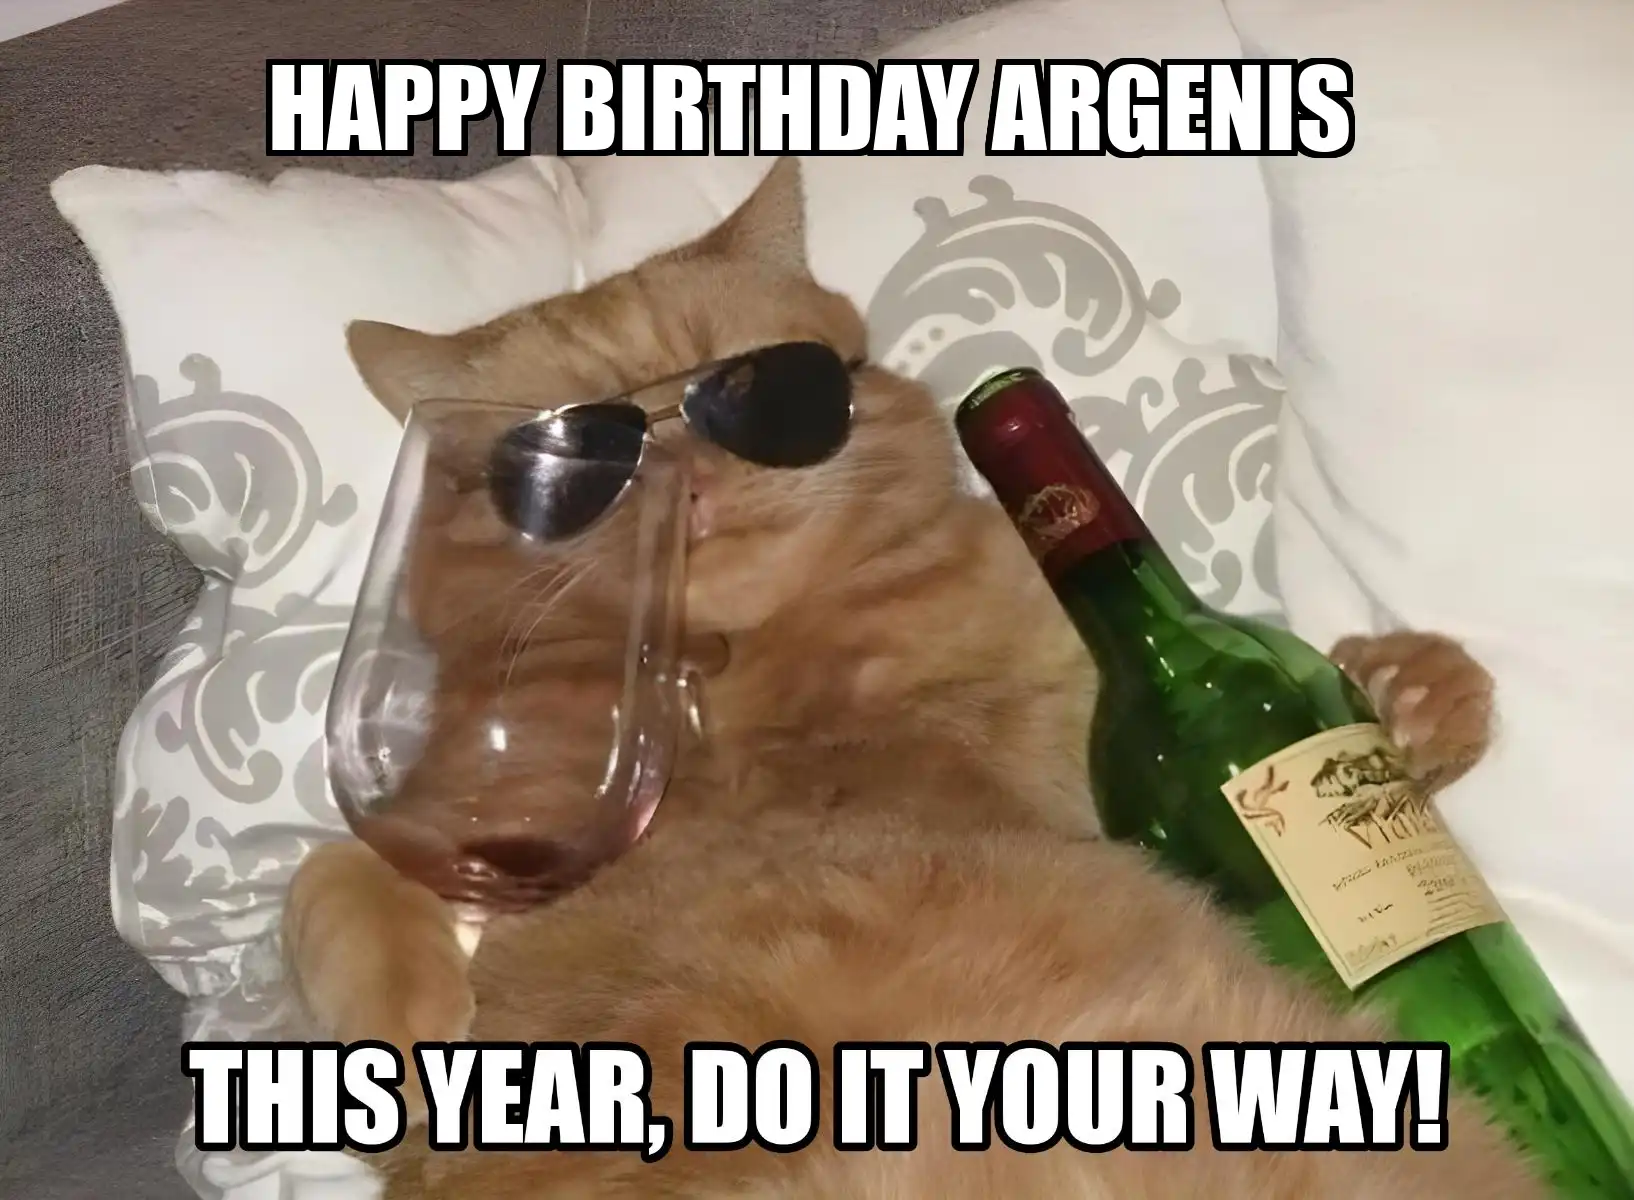 Happy Birthday Argenis This Year Do It Your Way Meme